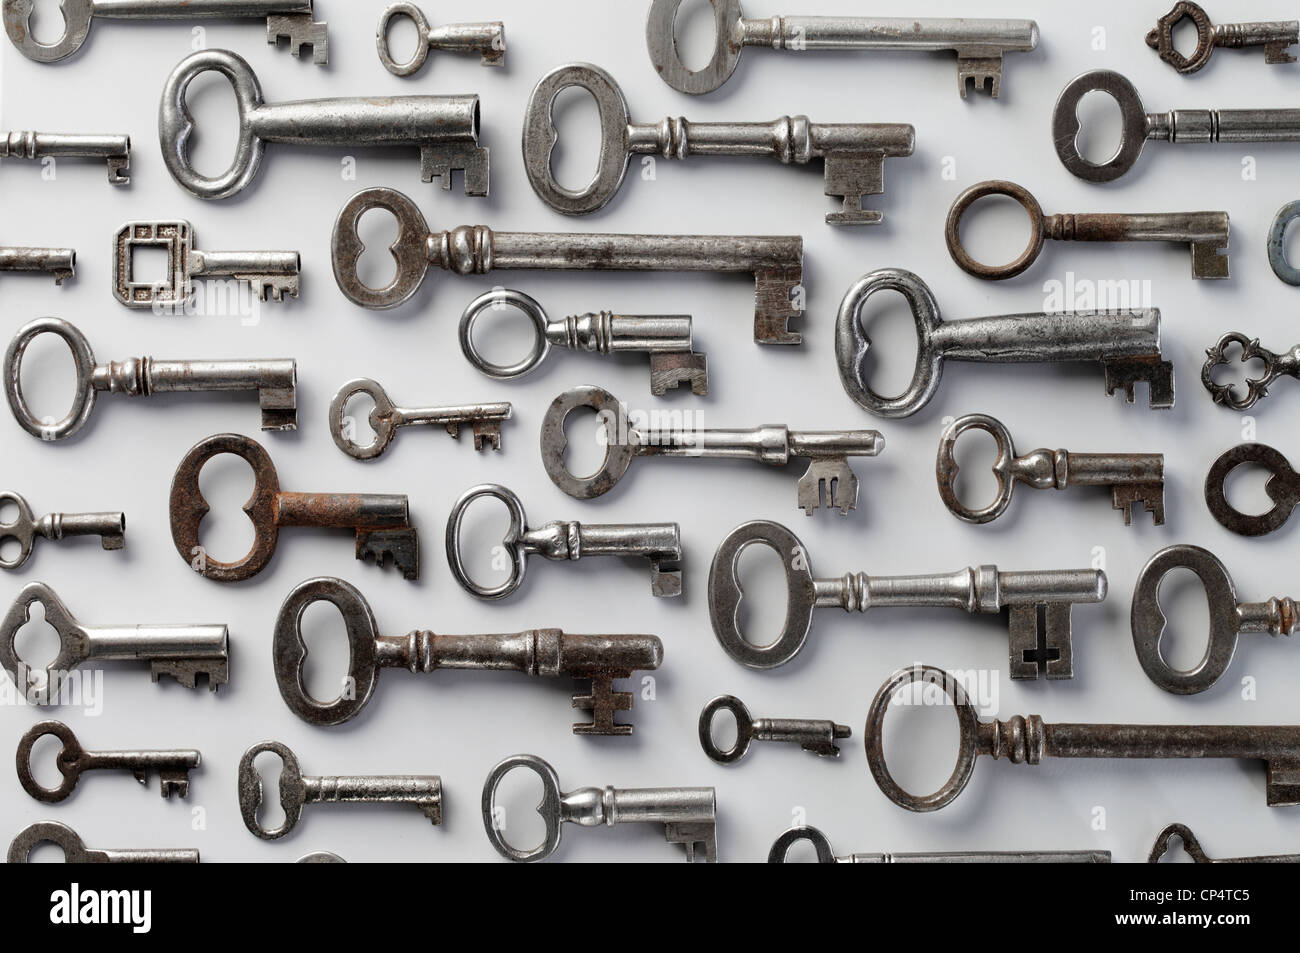 A Small Collection of Old Antique Keys. Stock Photo